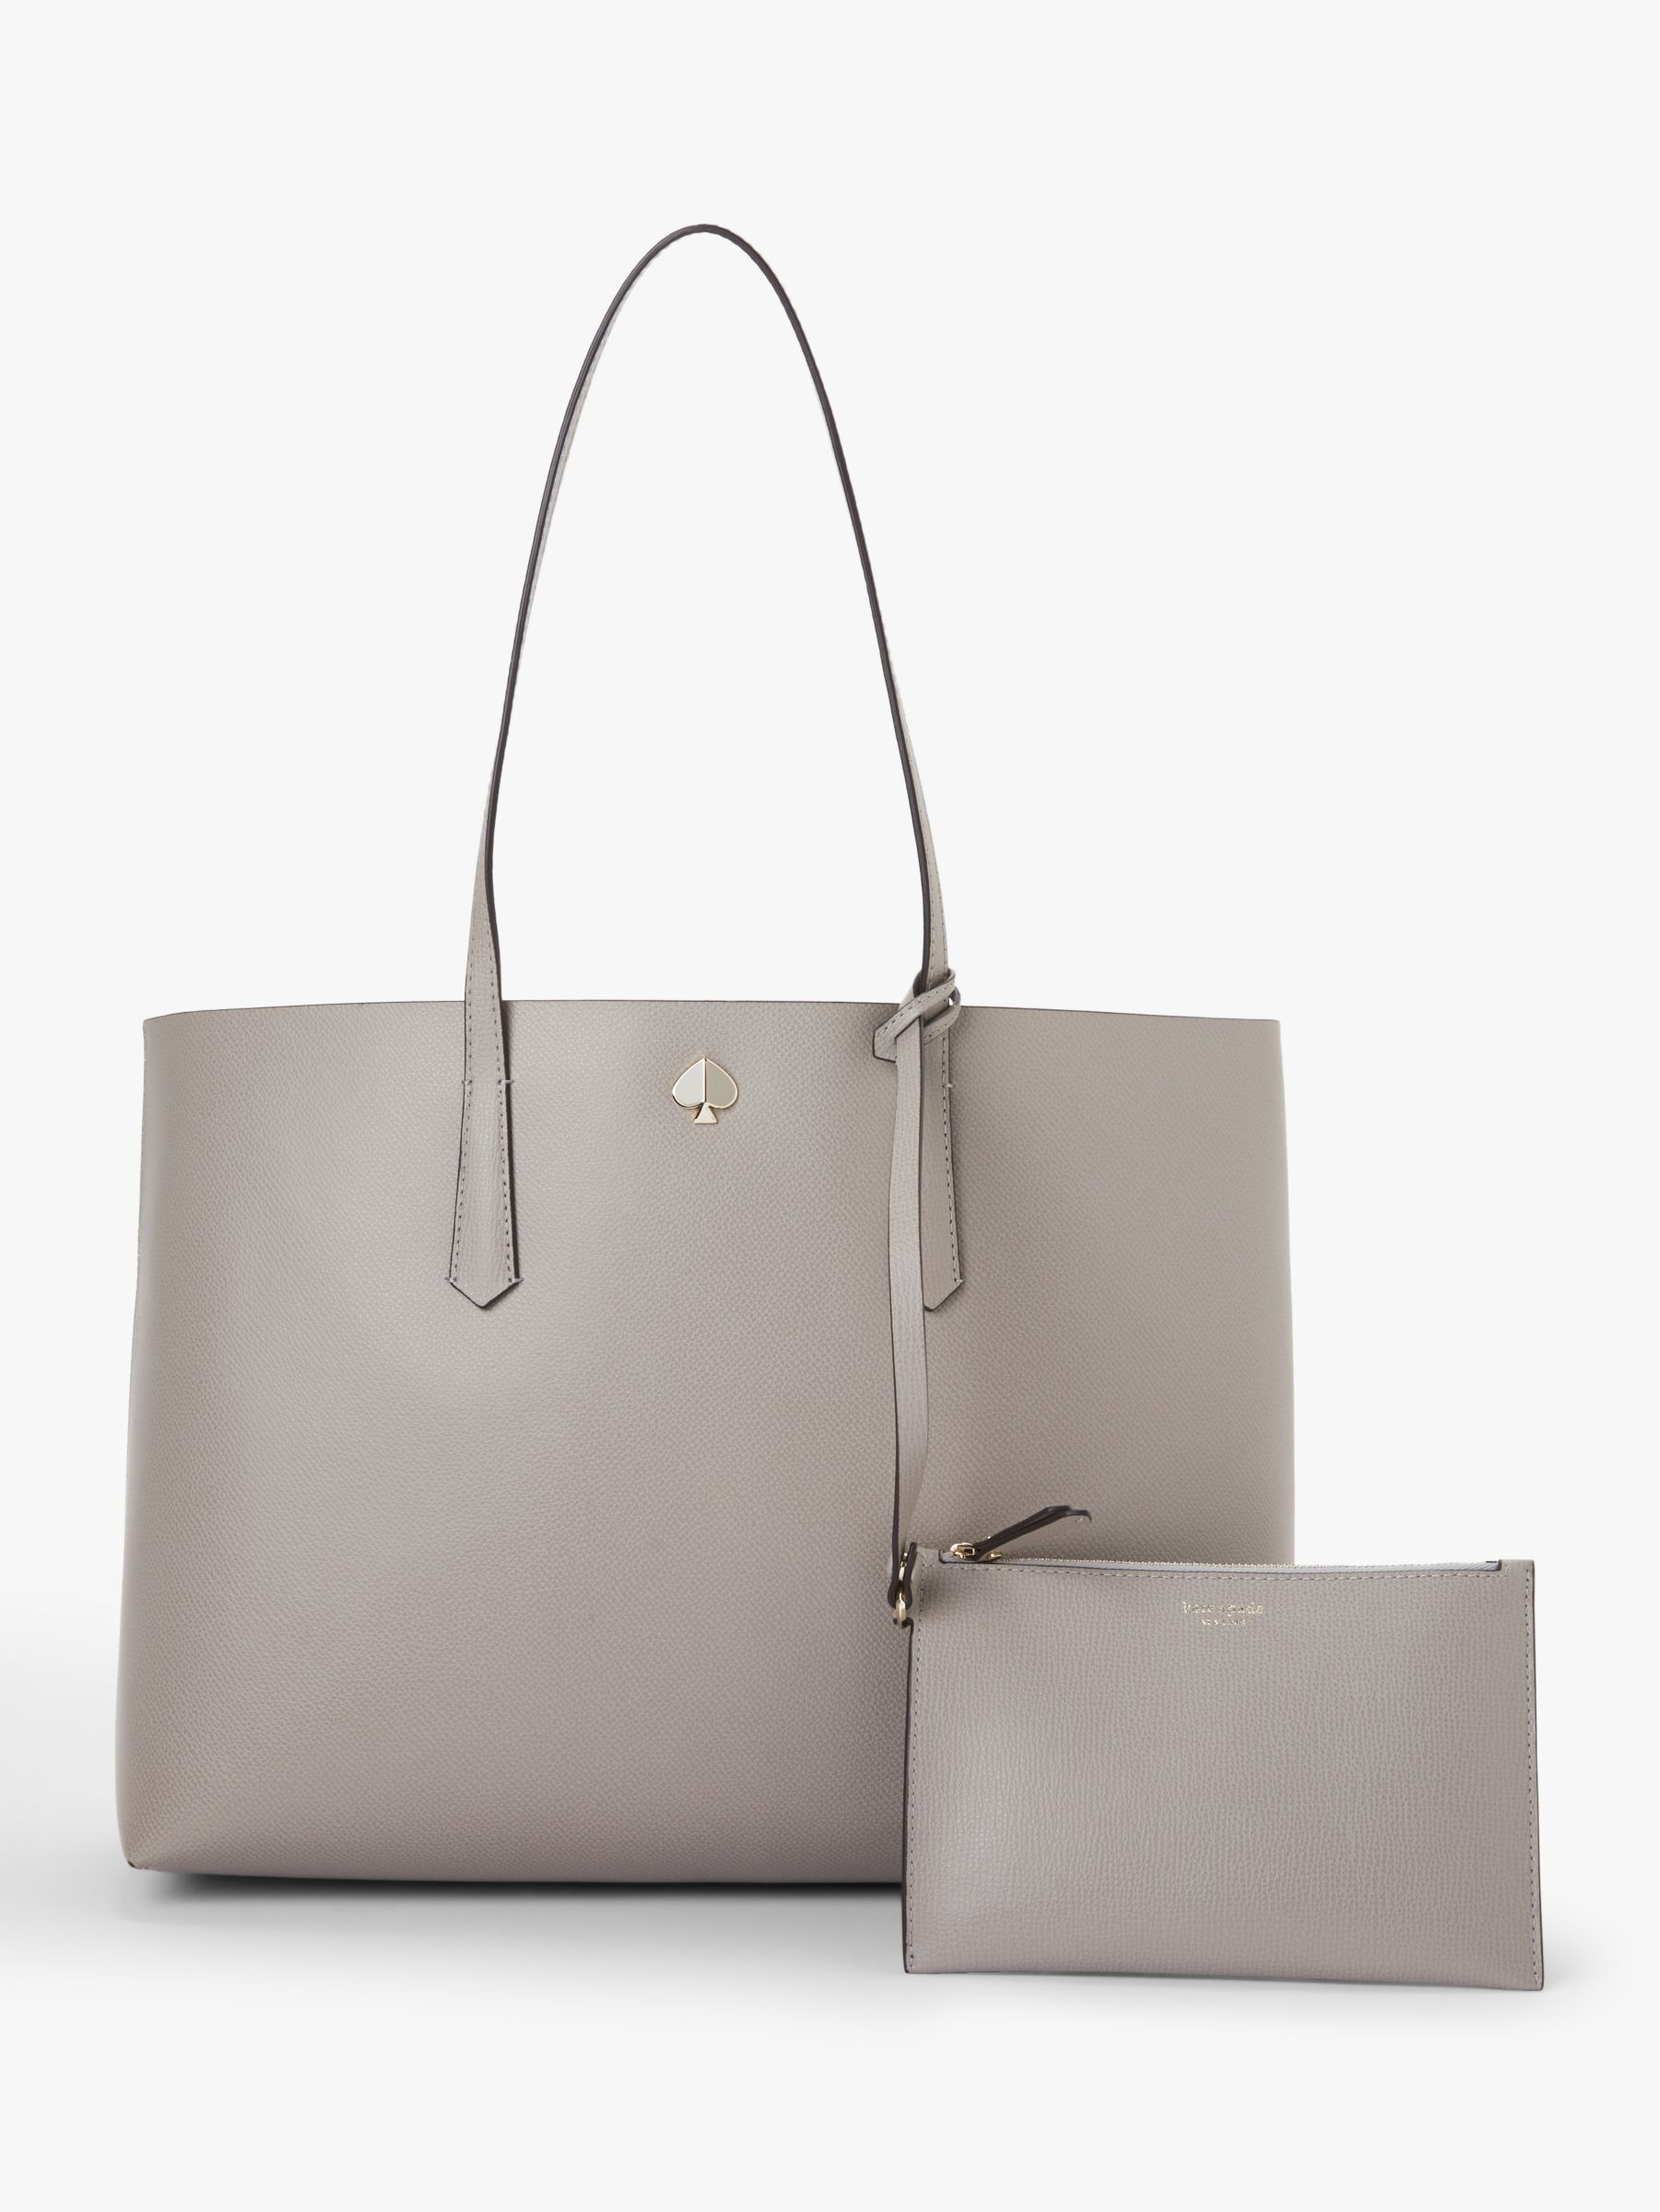 Arriba 66+ imagen kate spade large molly leather tote